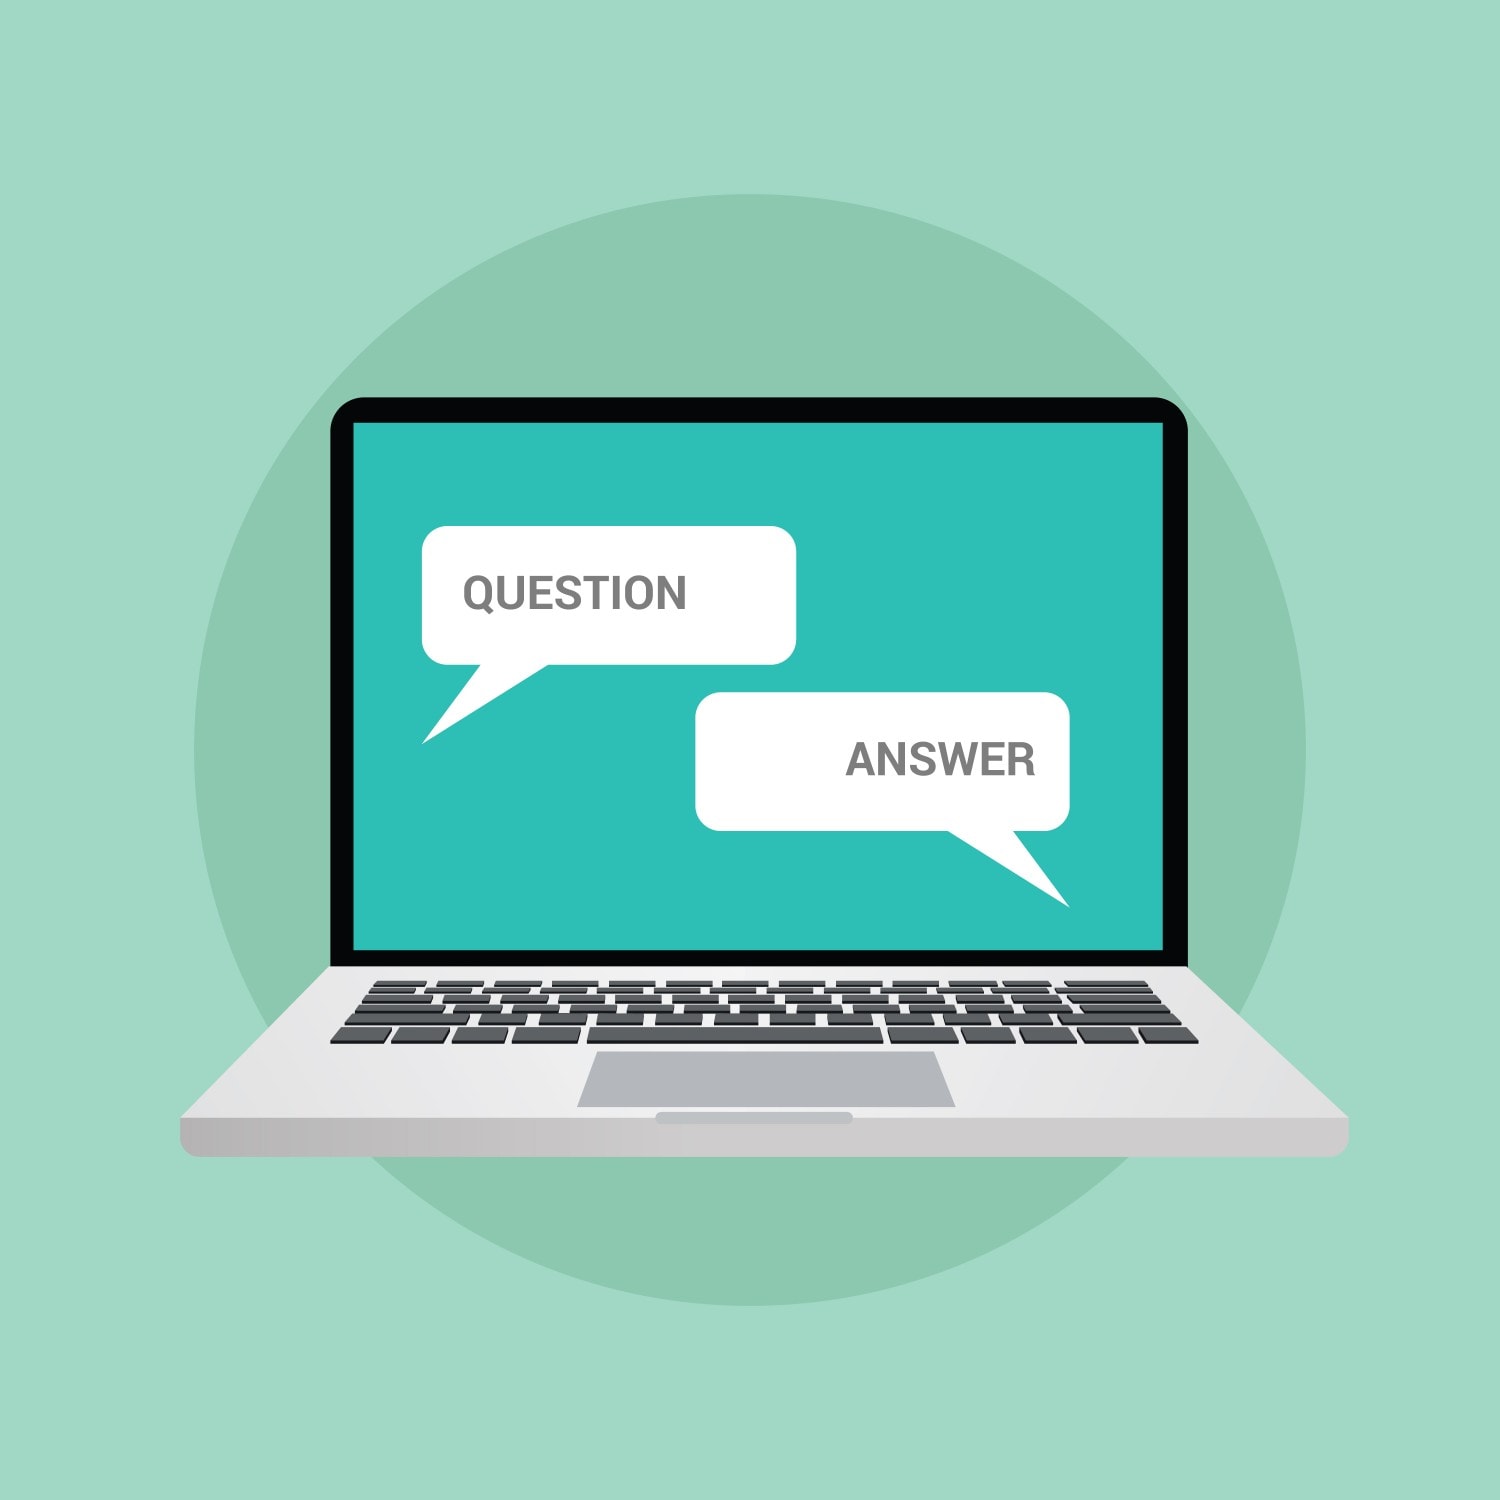 Question and answer in a laptop mockup